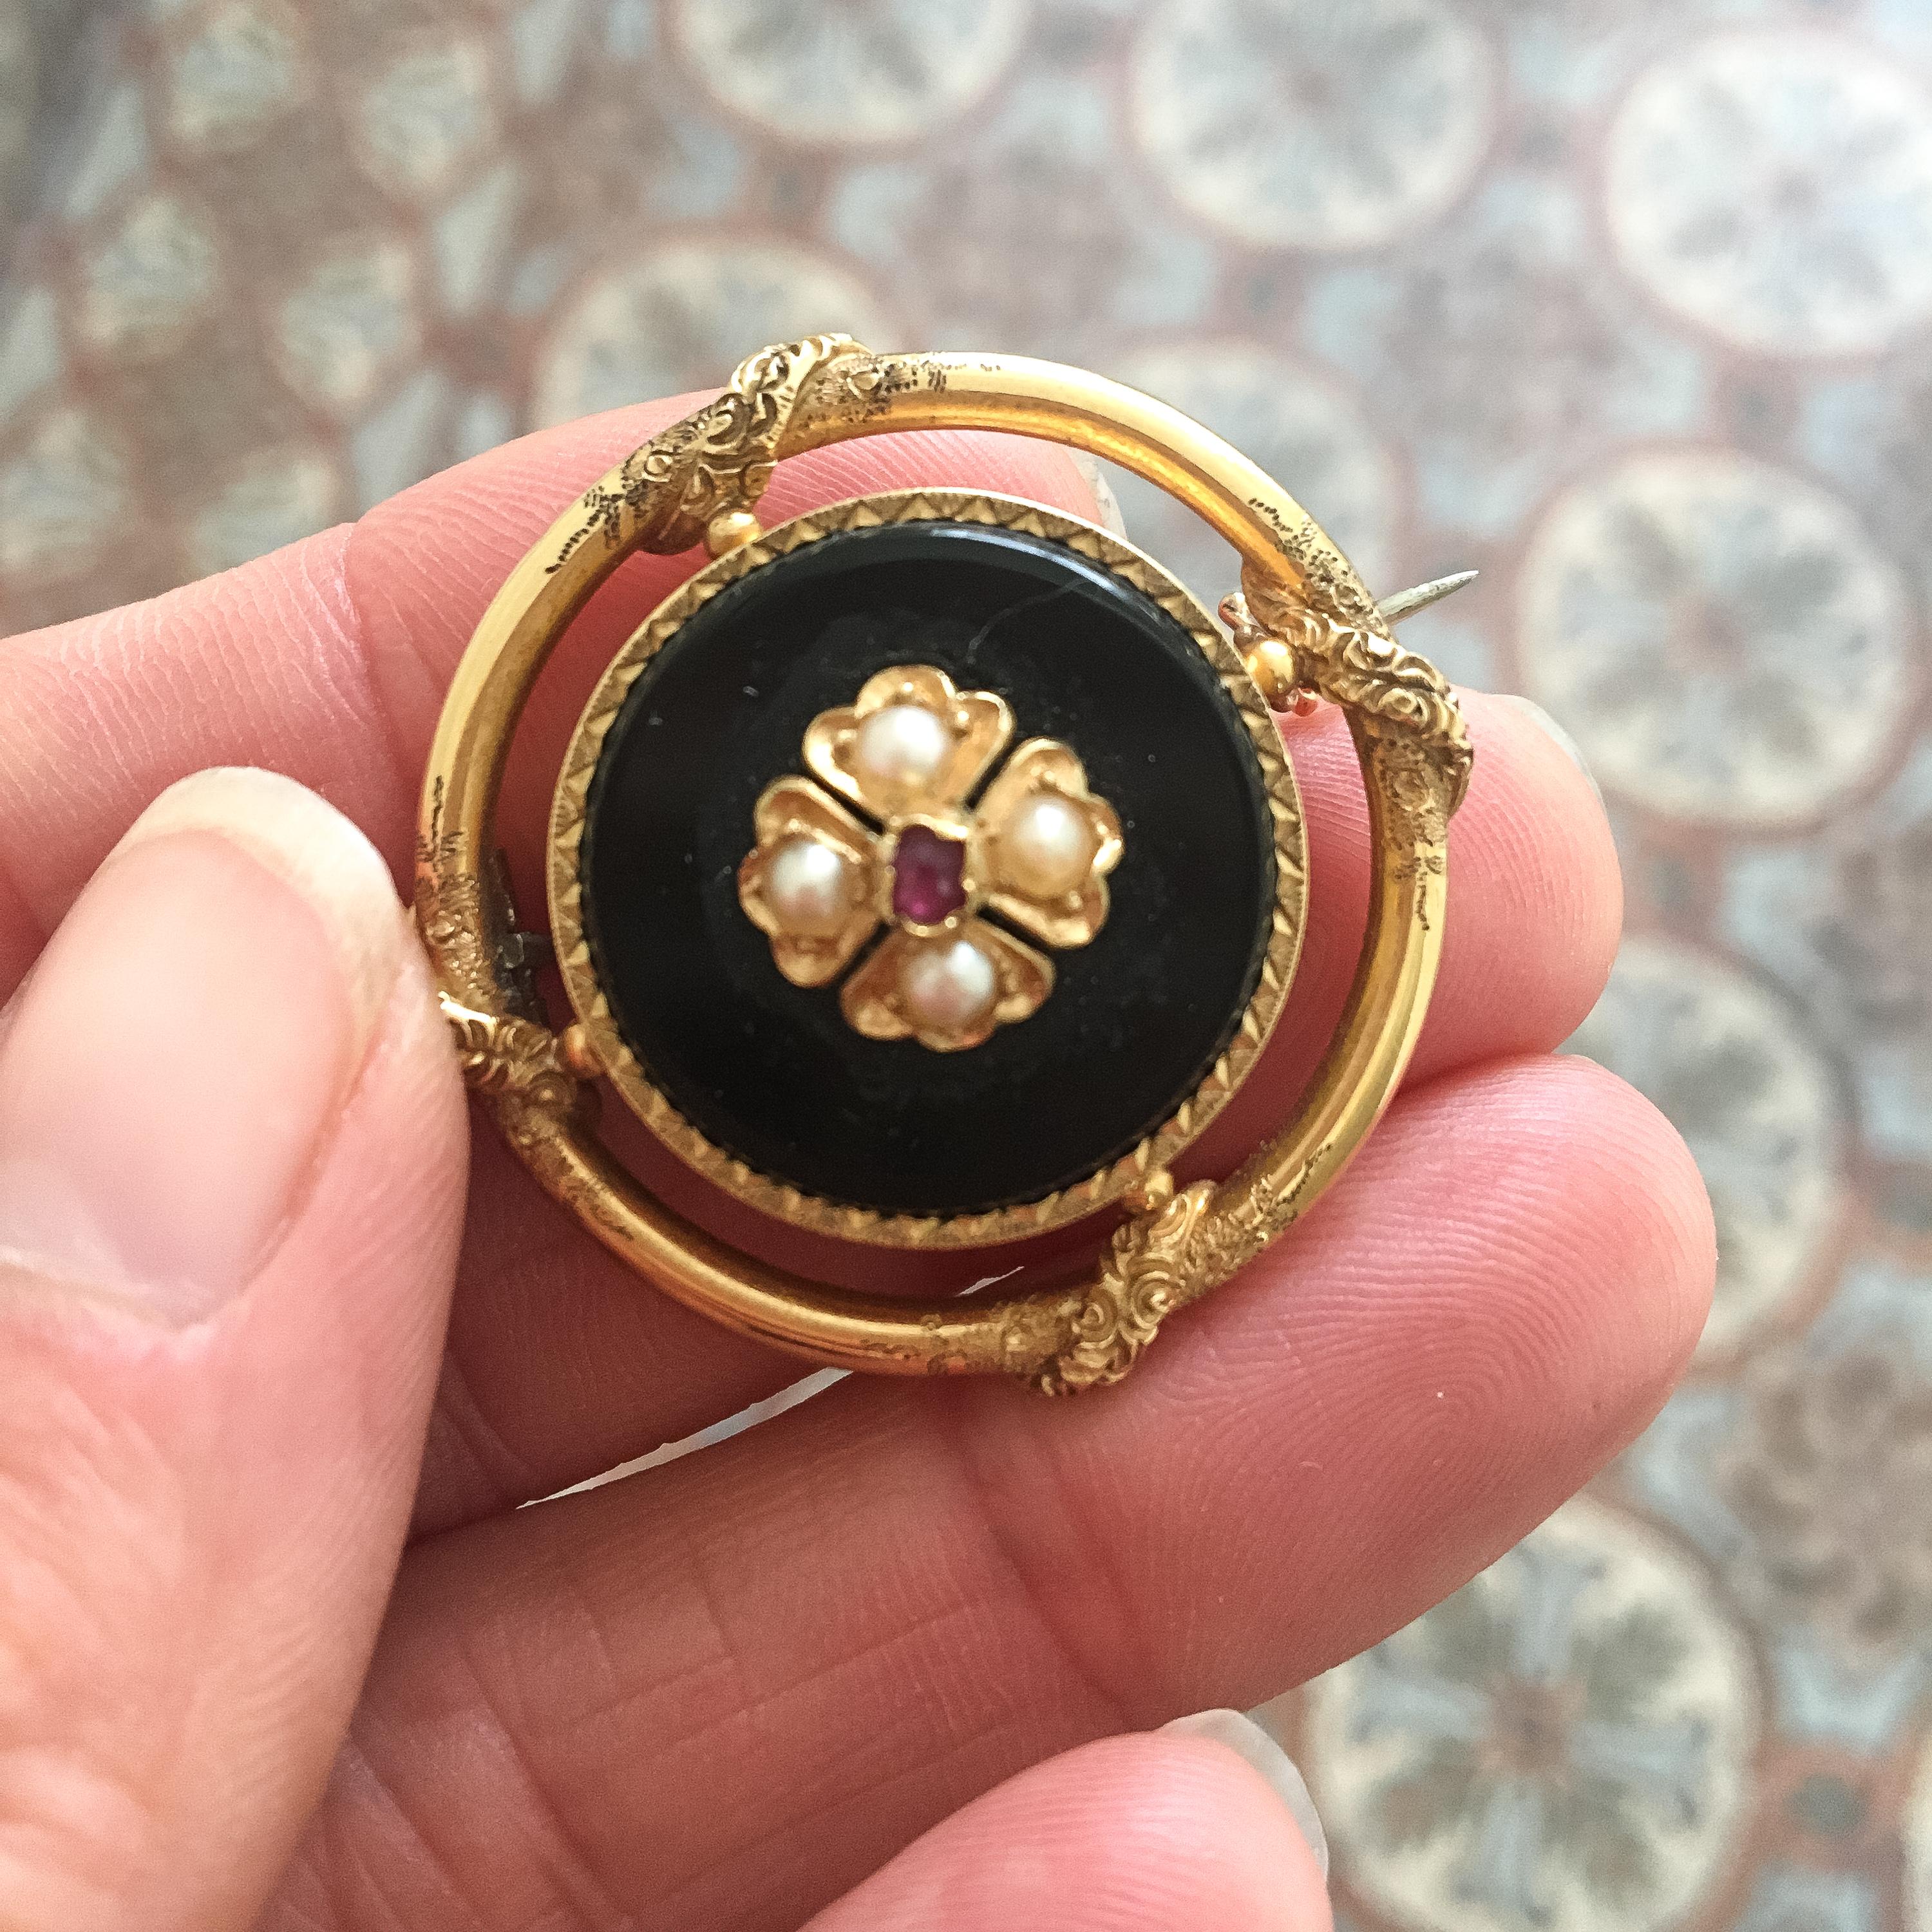 A Victorian 14 Karat gold black round onyx, seed pearl and ruby pin brooch. The round onyx stone is designed with four seed pearls and a ruby, set in a floral decor. The 14k gold border has an etched design and the gold ring around has beautiful